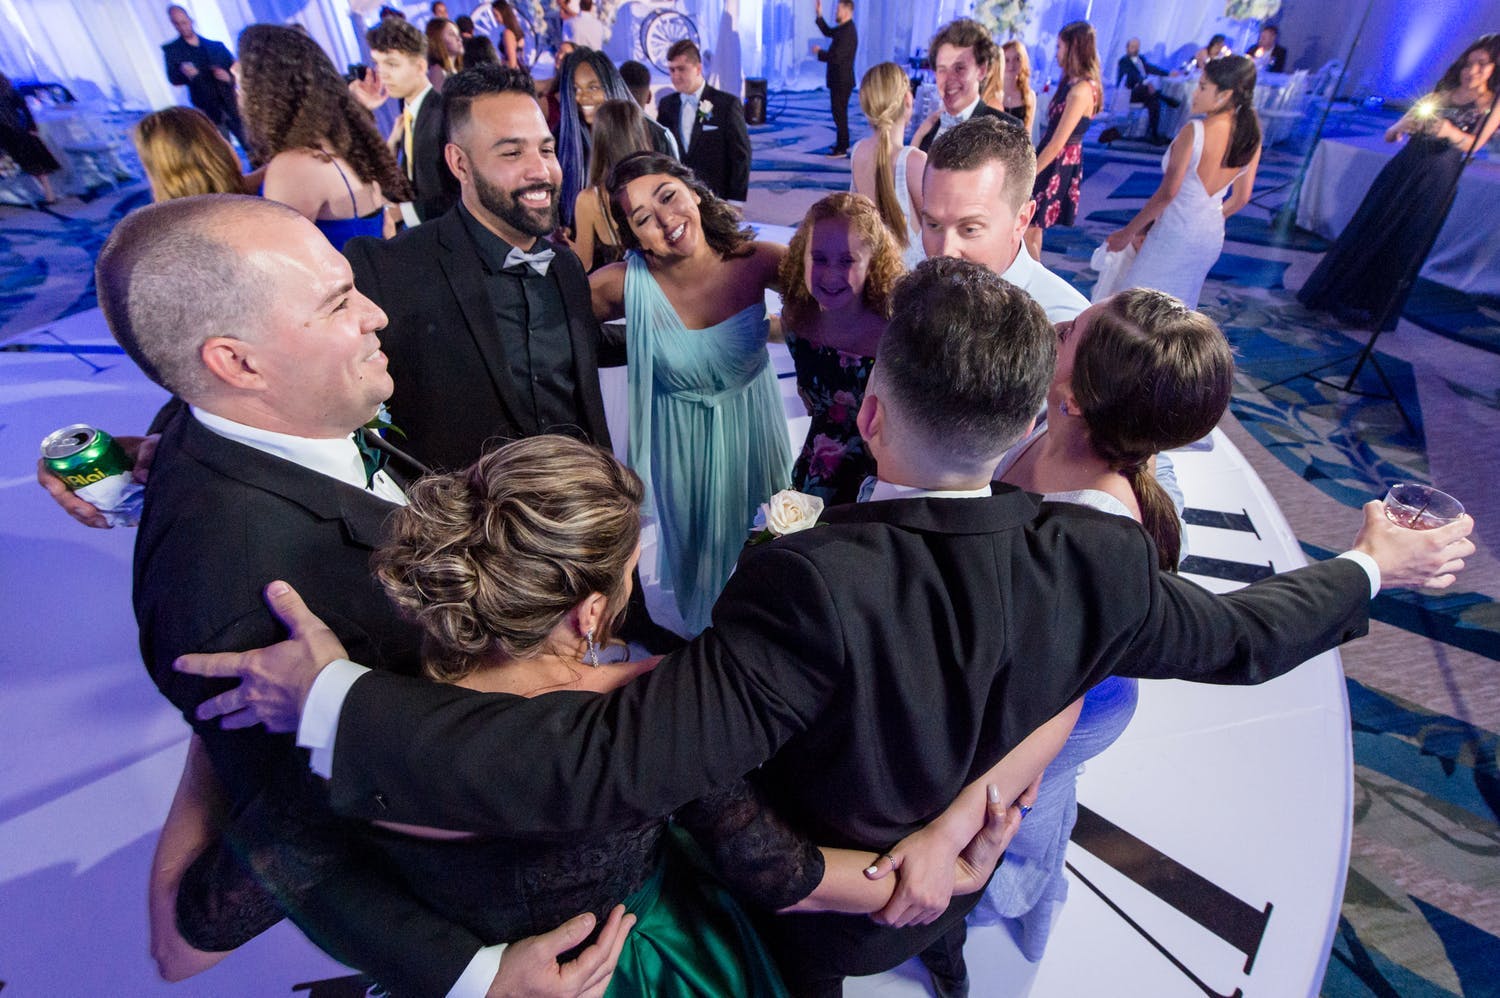 Friends and family hug on dance floor at quinceañera | PartySlate